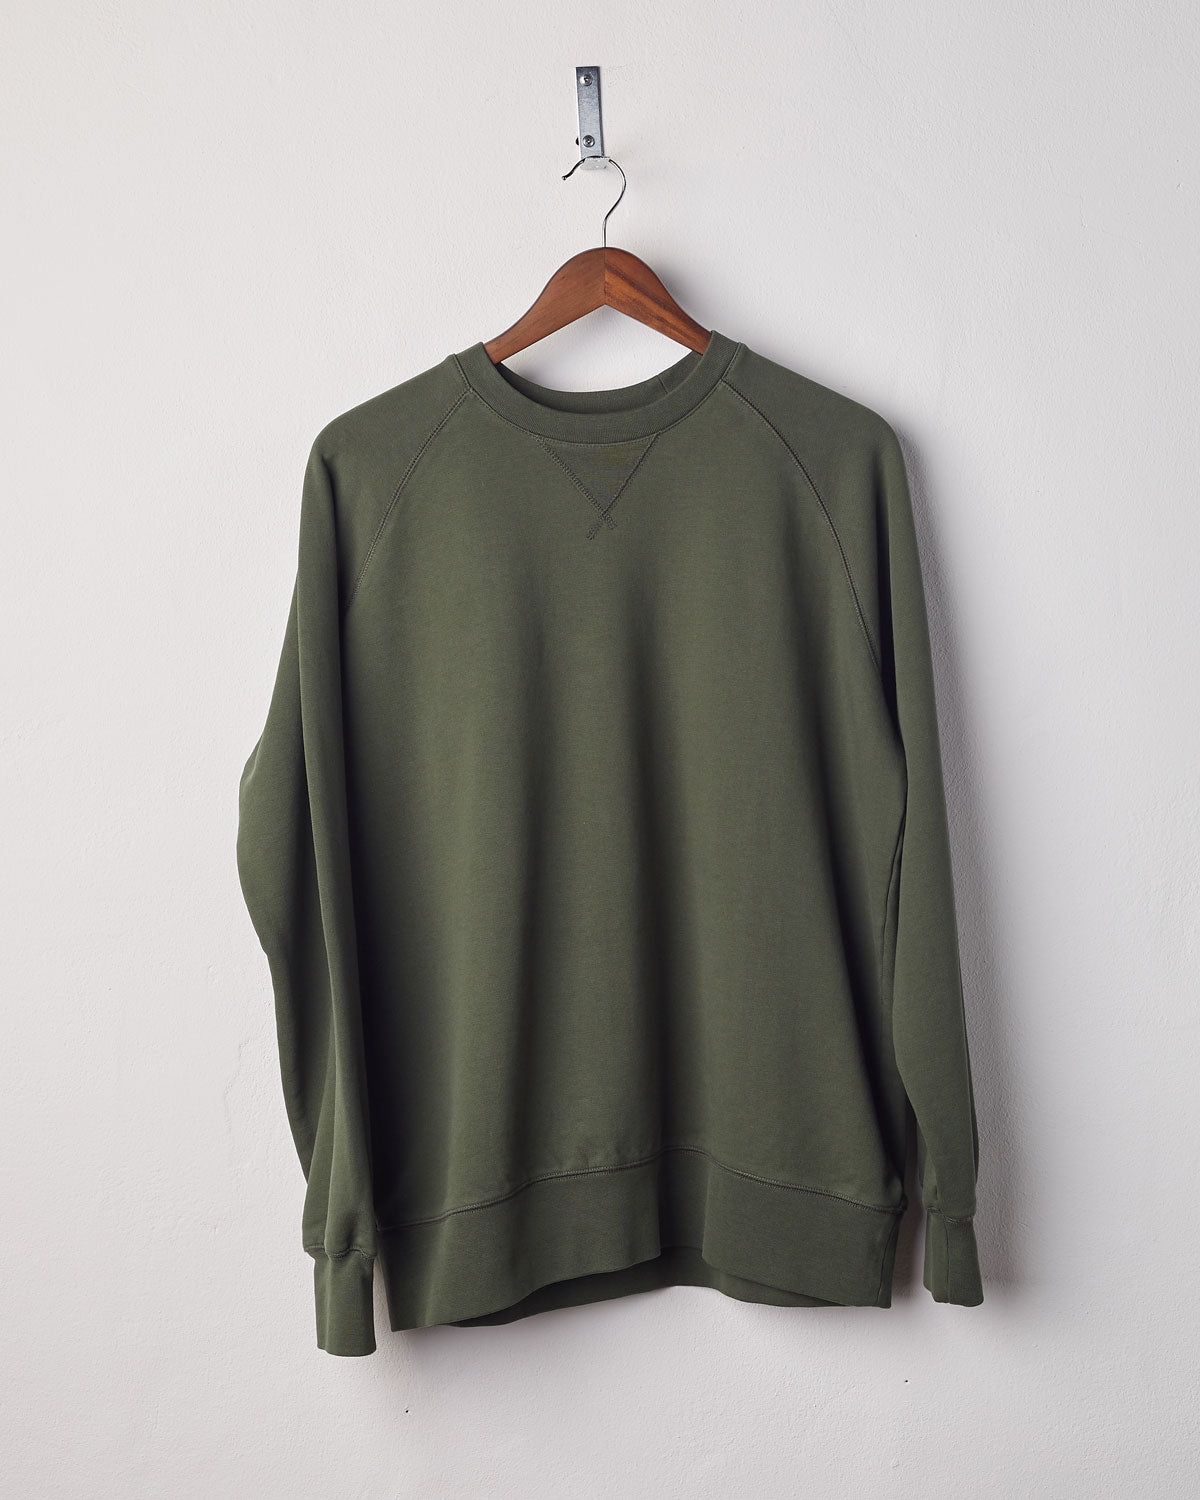 Front view of vine green organic heavyweight cotton #7005 jersey sweatshirt by Uskees presented on hanger.